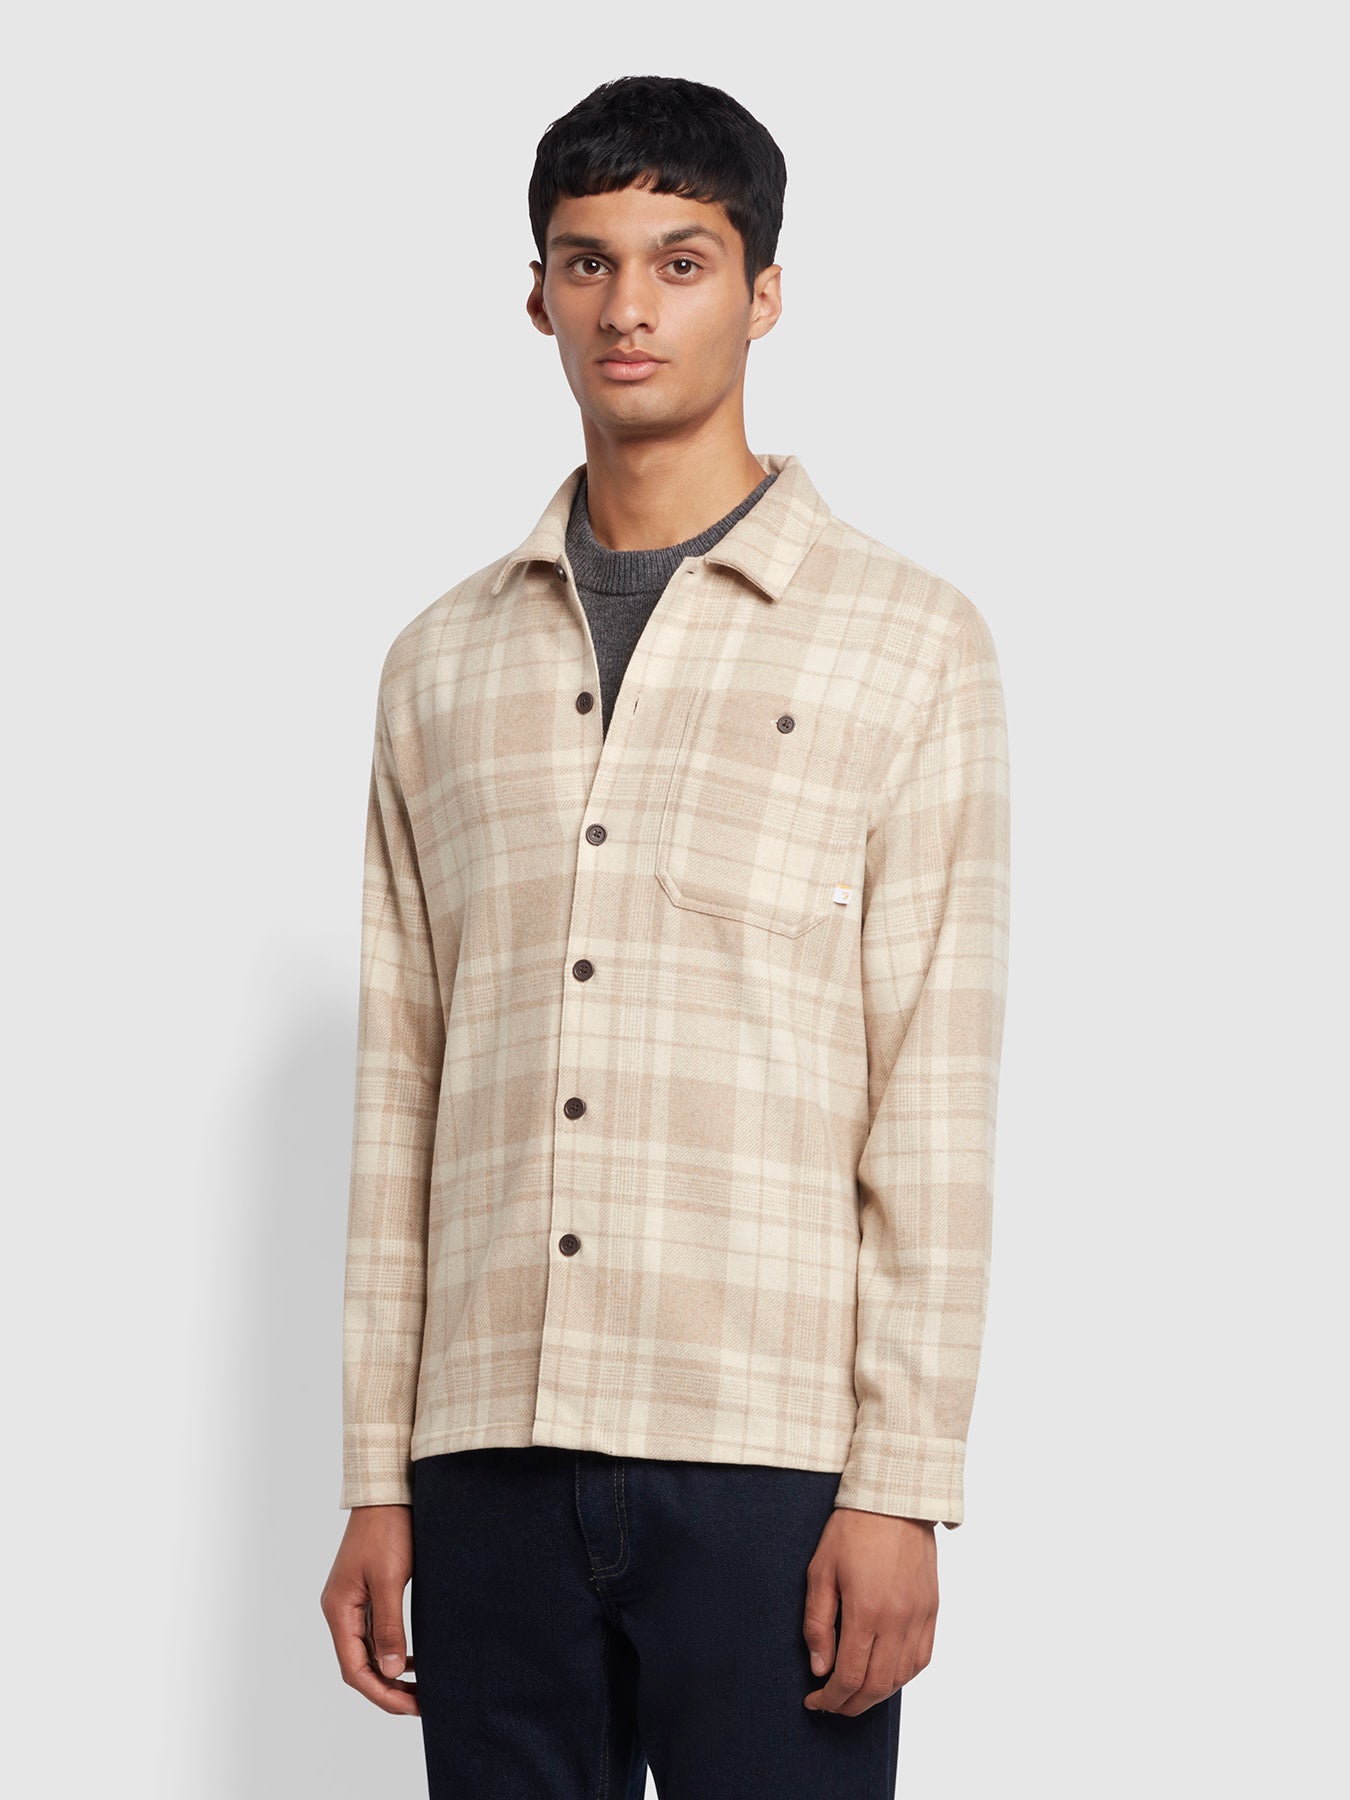 View Marks Relaxed Fit Check Overshirt In Straw Beige information